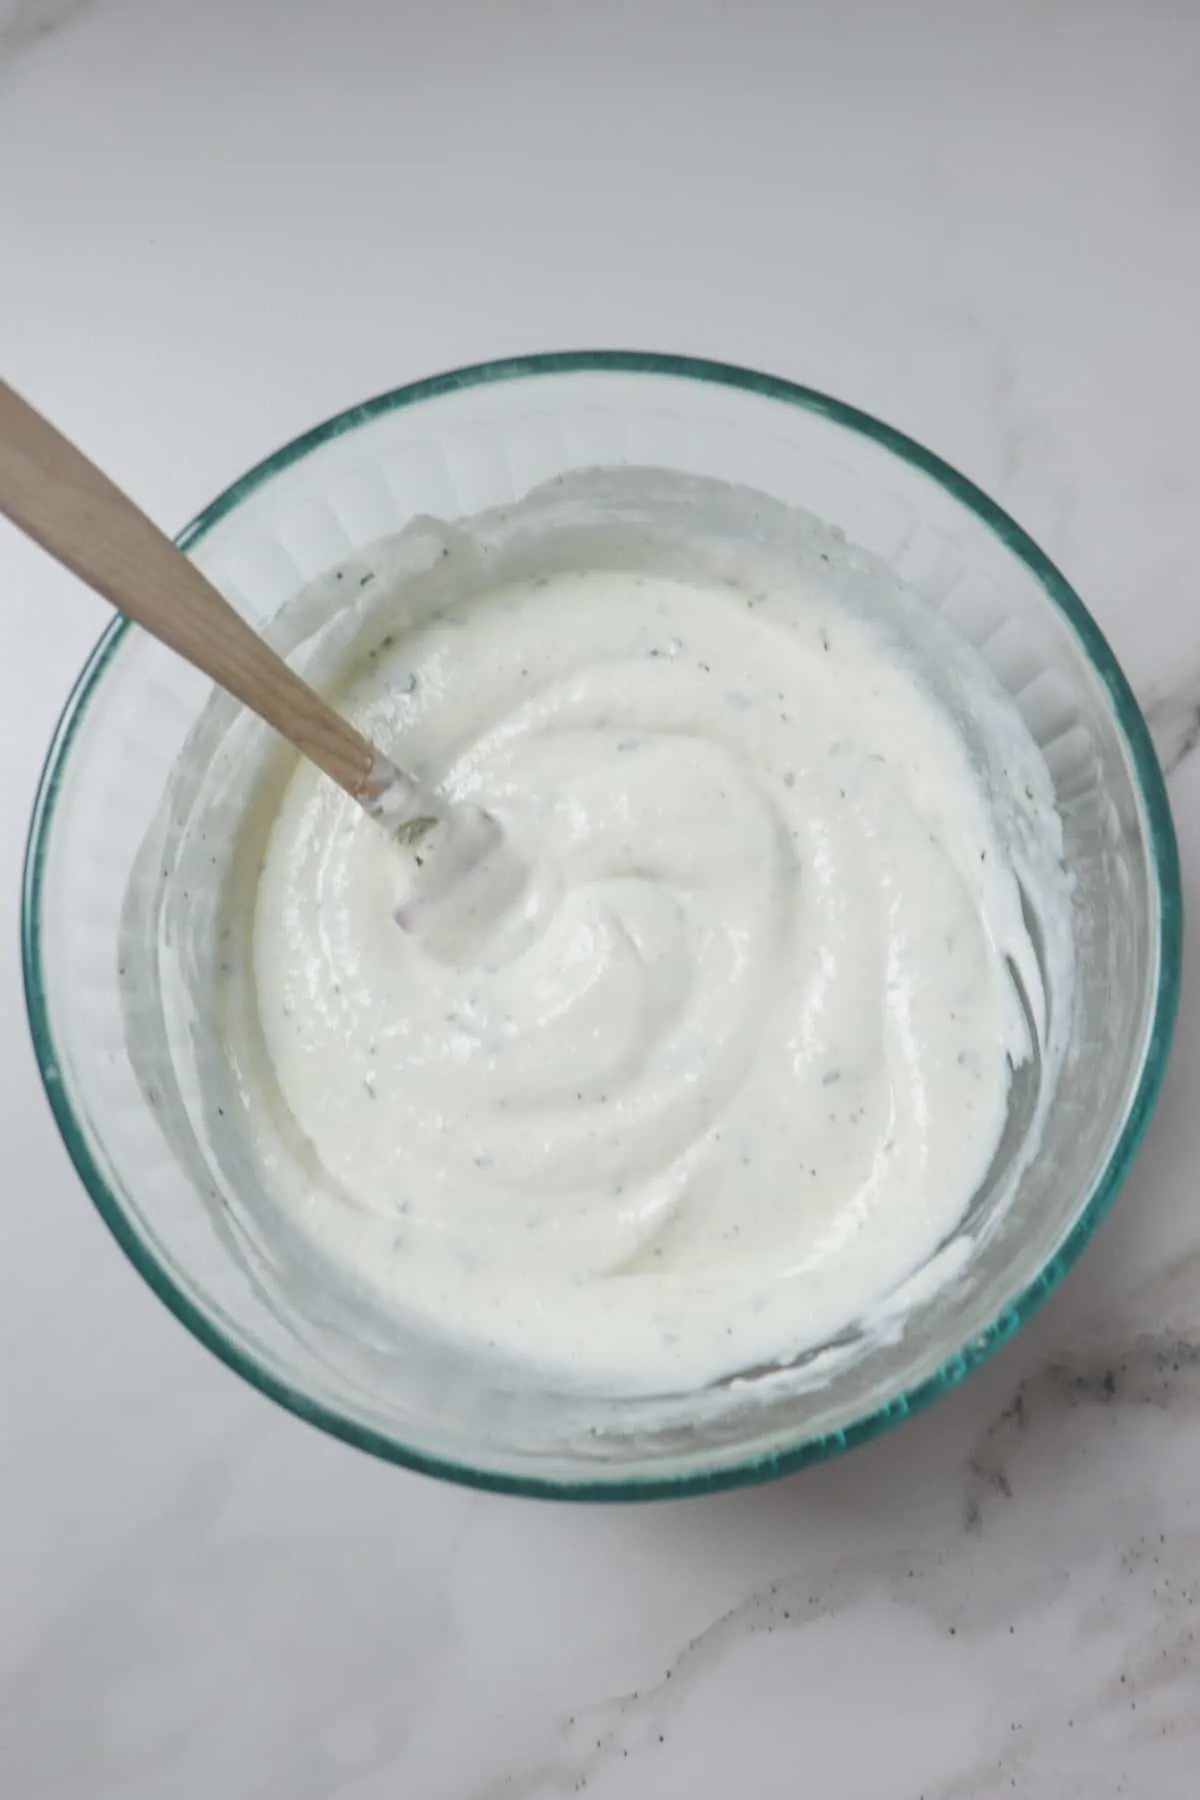 mixing ranch dip in glass bowl